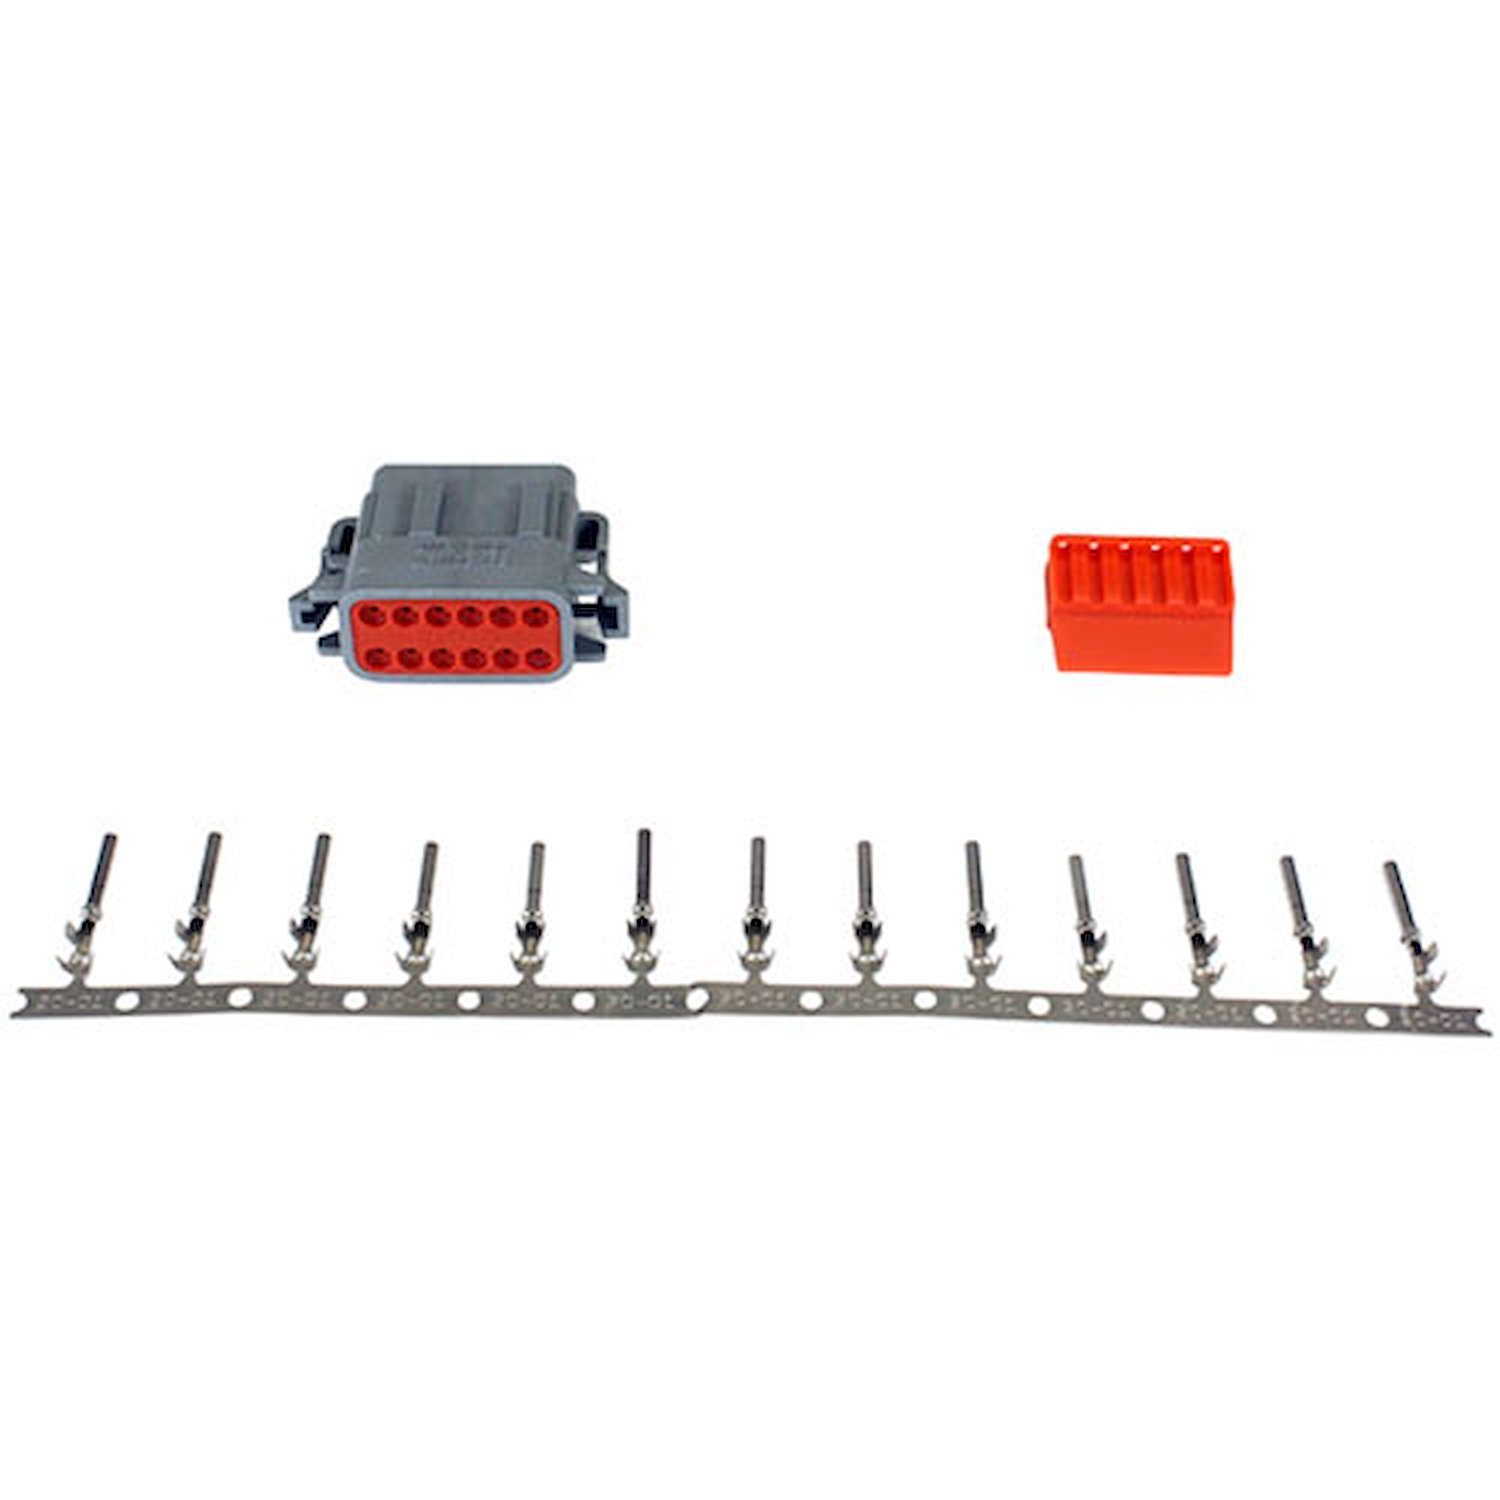 DTM-Style 8-Way Connector Kit Includes Plug, Receptacle, Plug Wedge Lock, Receptacle Wedge Lock, 9 Female Pins And 9 Male Pins